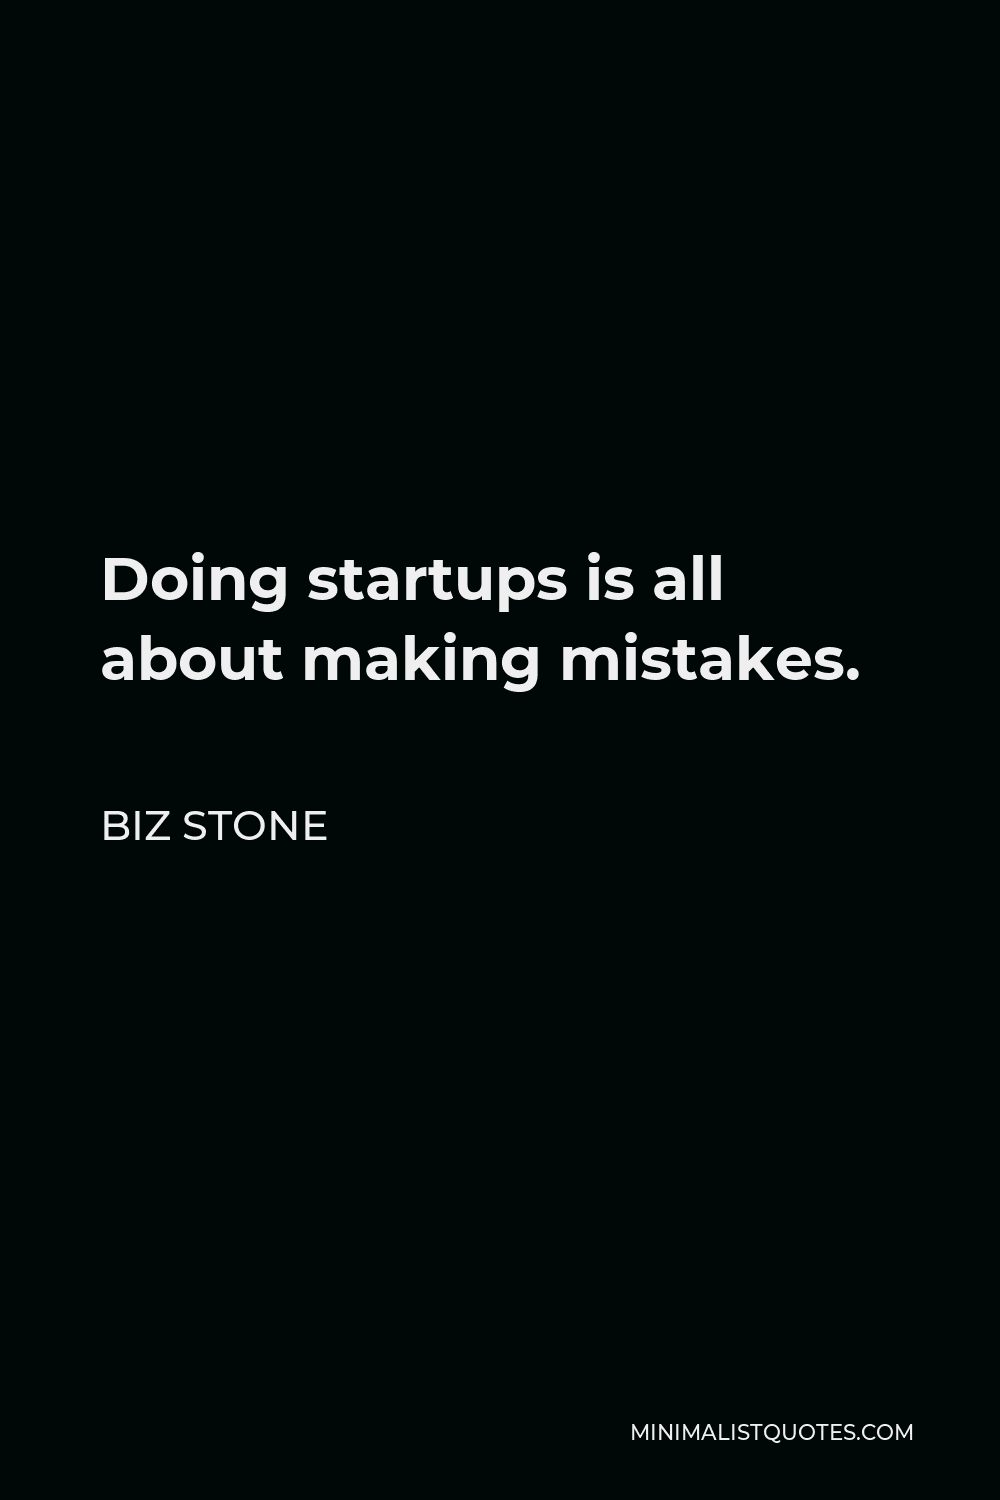 Biz Stone Quote - Doing startups is all about making mistakes.